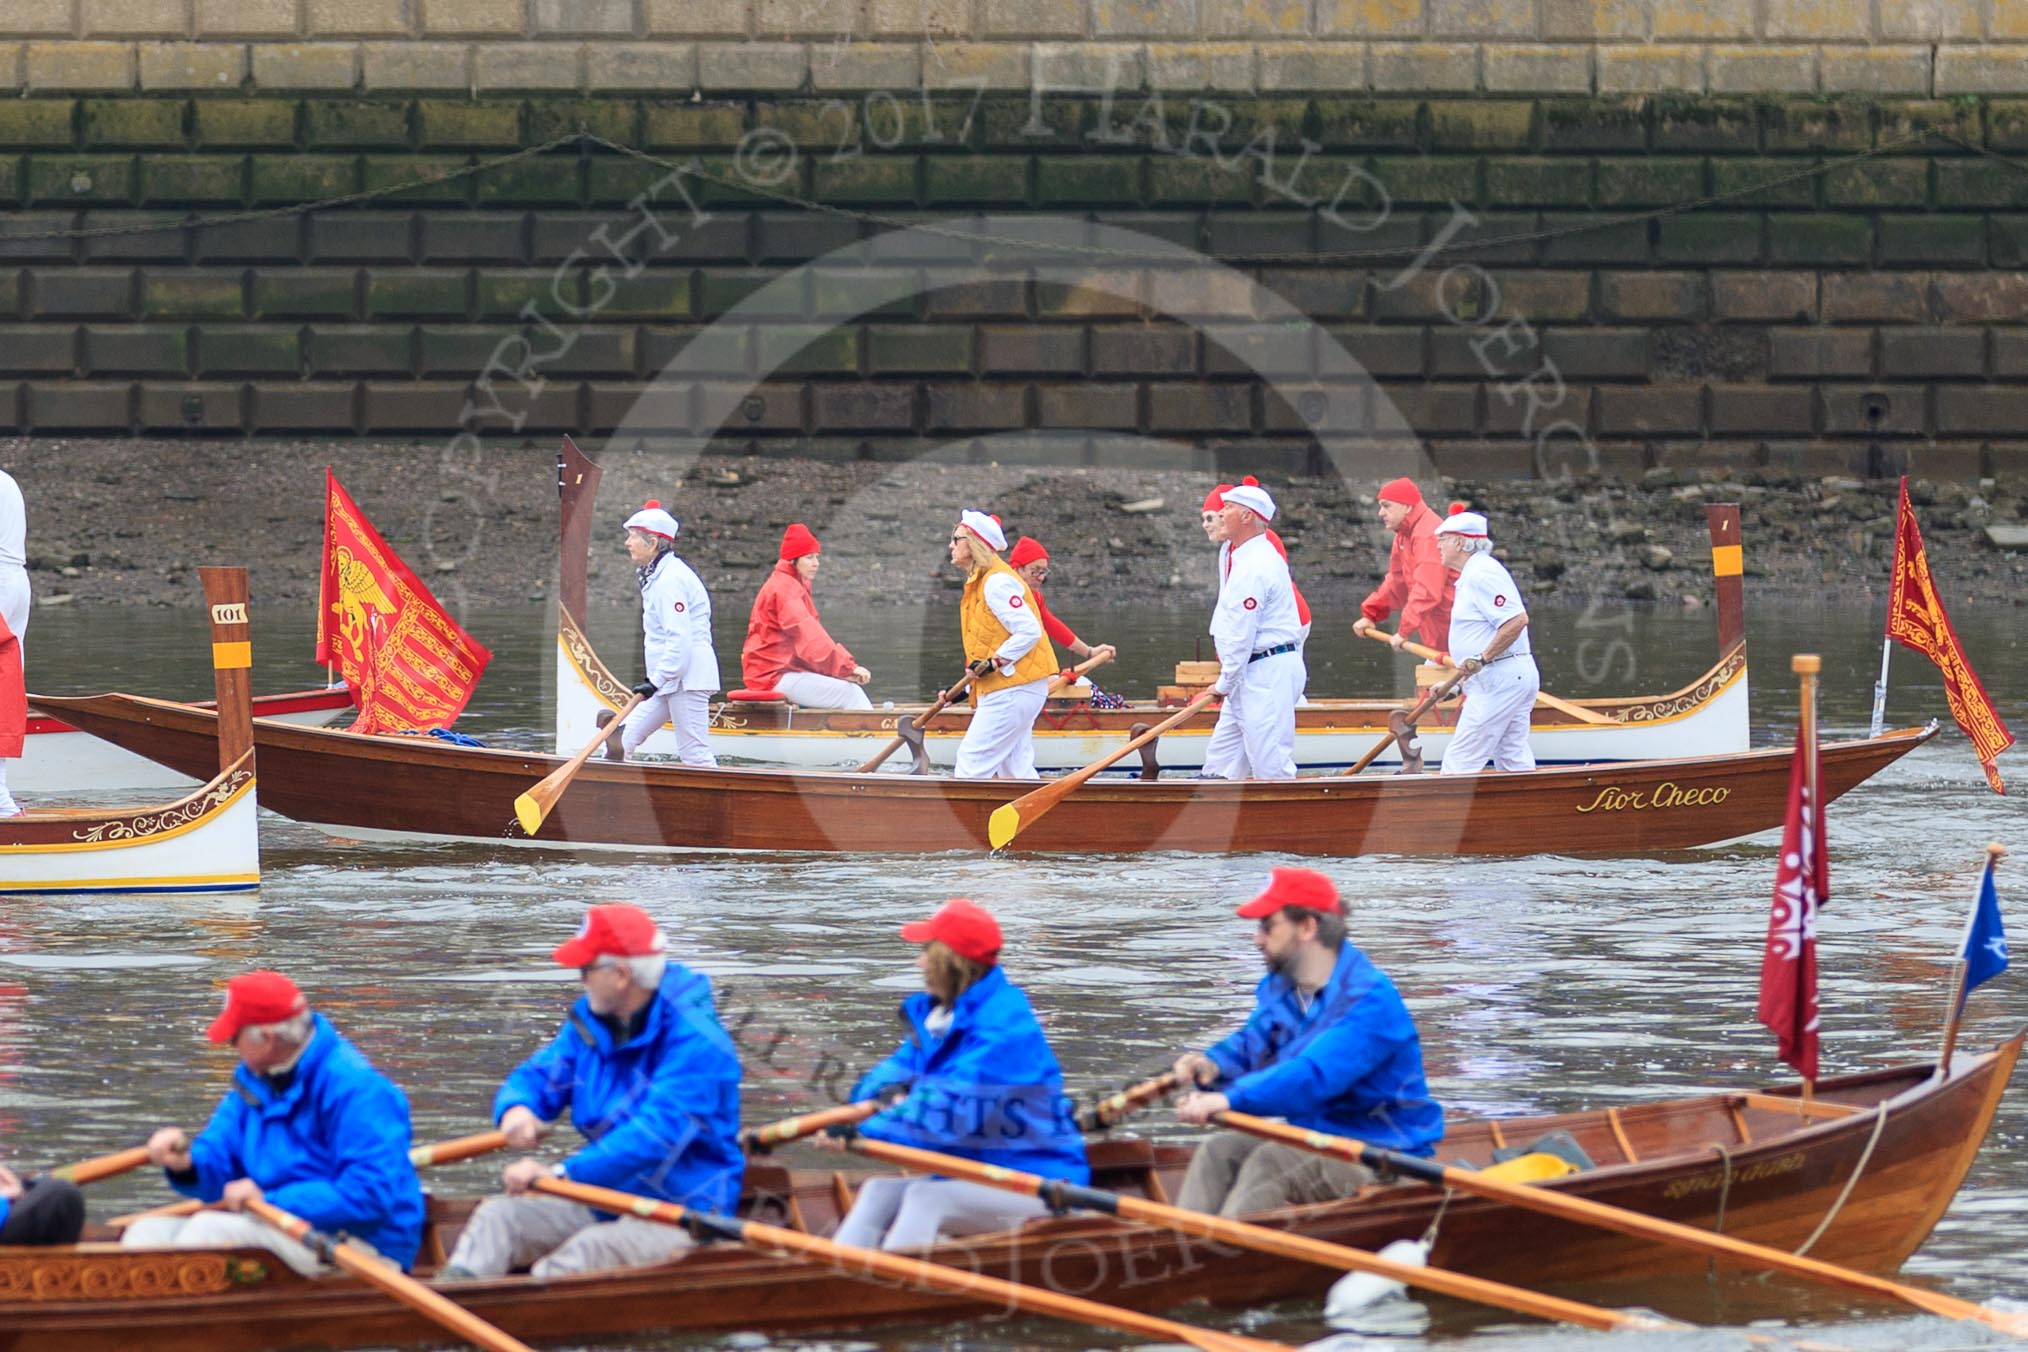 The Cancer Research UK Women's Boat Race 2018: Historic rowing boats (here from CityBargeClub.org.uk) entertaining the crowds.
River Thames between Putney Bridge and Mortlake,
London SW15,

United Kingdom,
on 24 March 2018 at 15:16, image #80